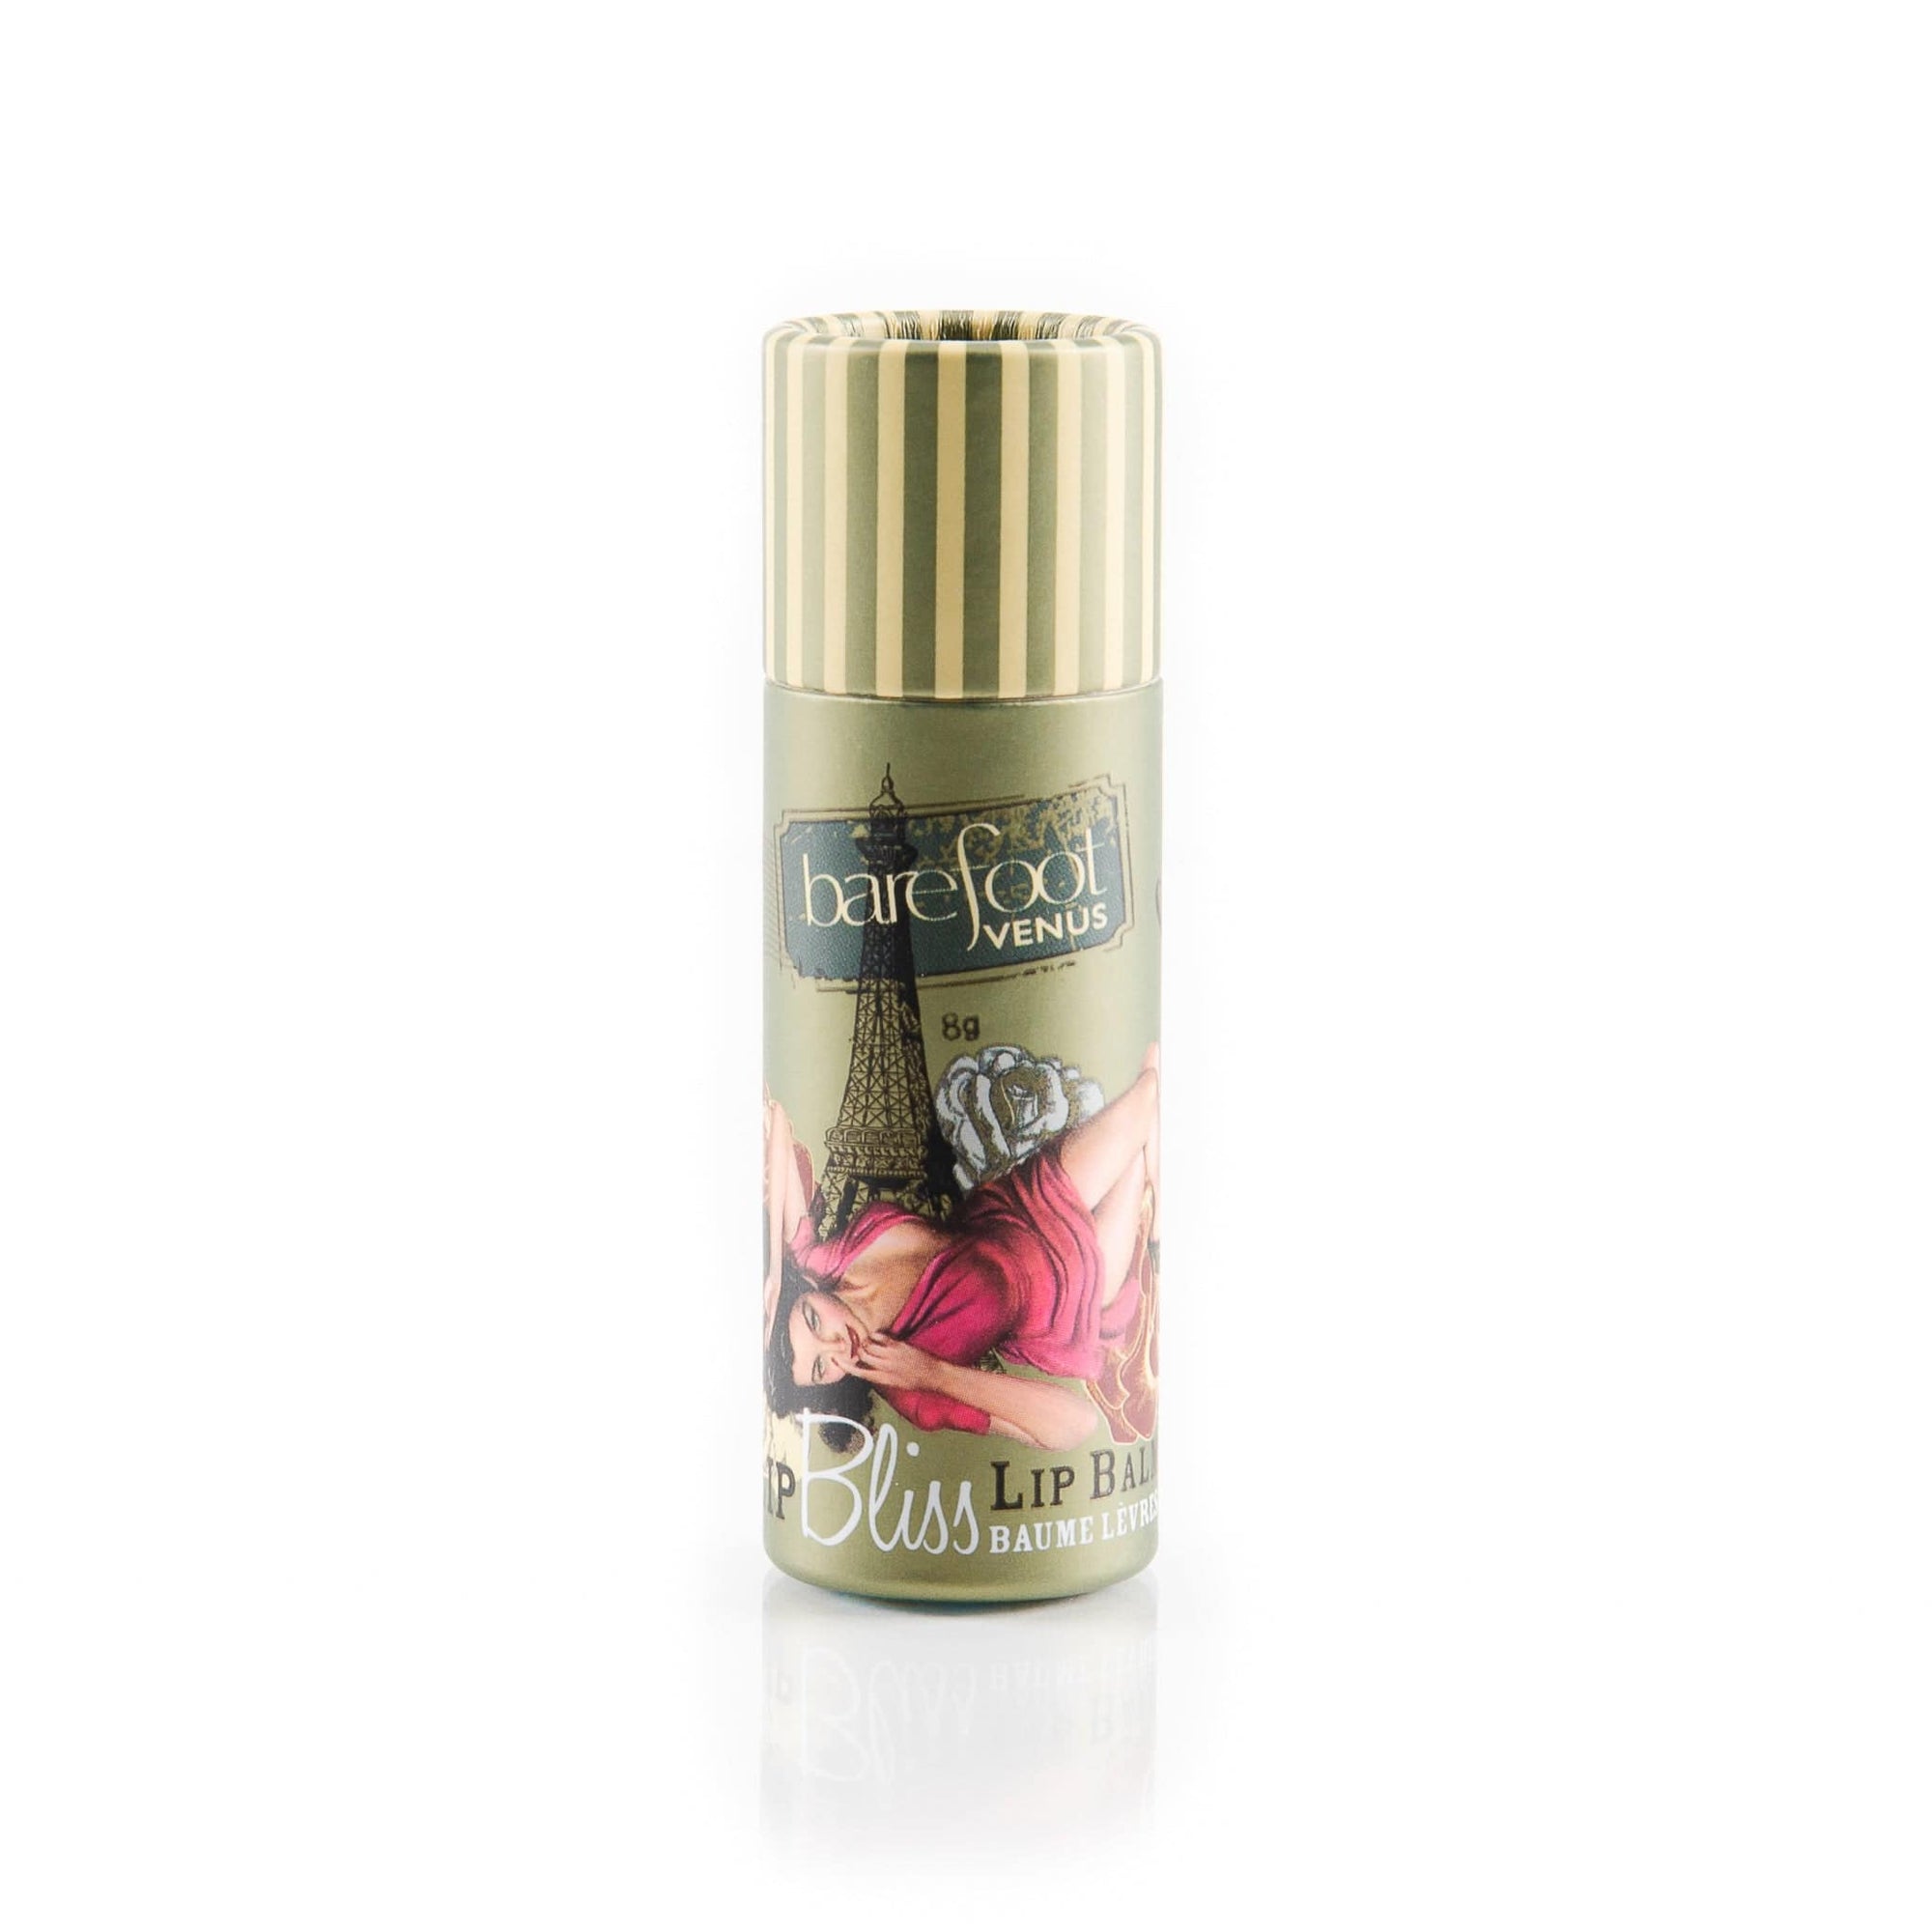 Ruby Red Lip Balm 100% PURE. NUTRIENT RICH. KISSED BY NATURE. Barefoot Venus